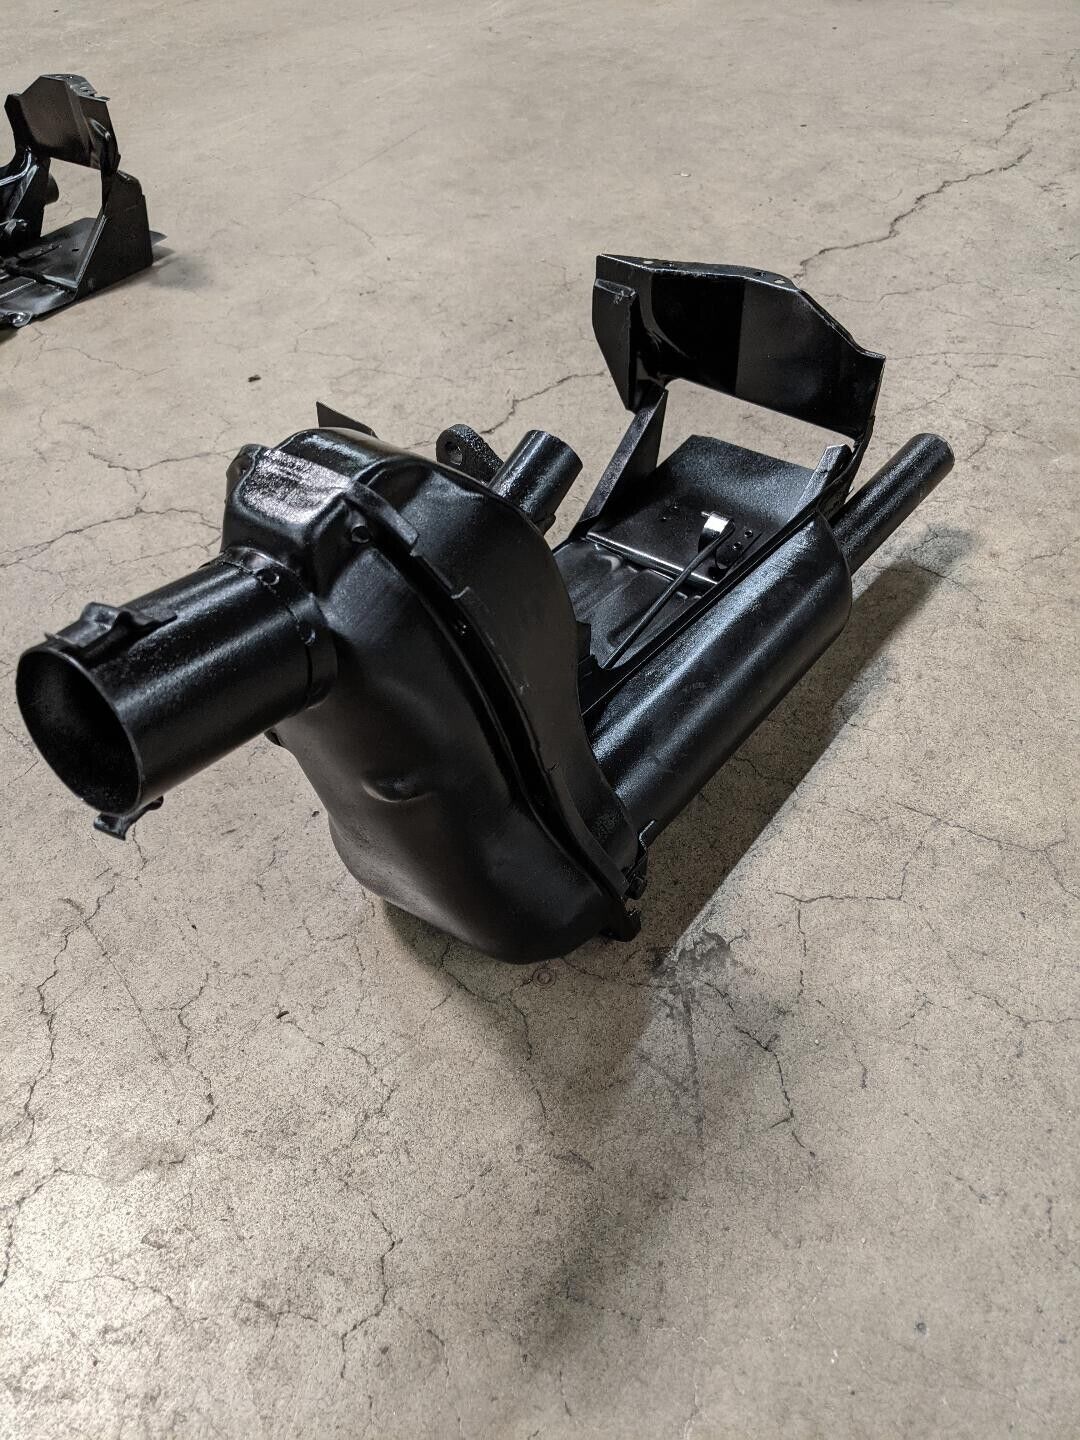 Volkswagen Beetle 40 HP Left and Right Heater Boxes